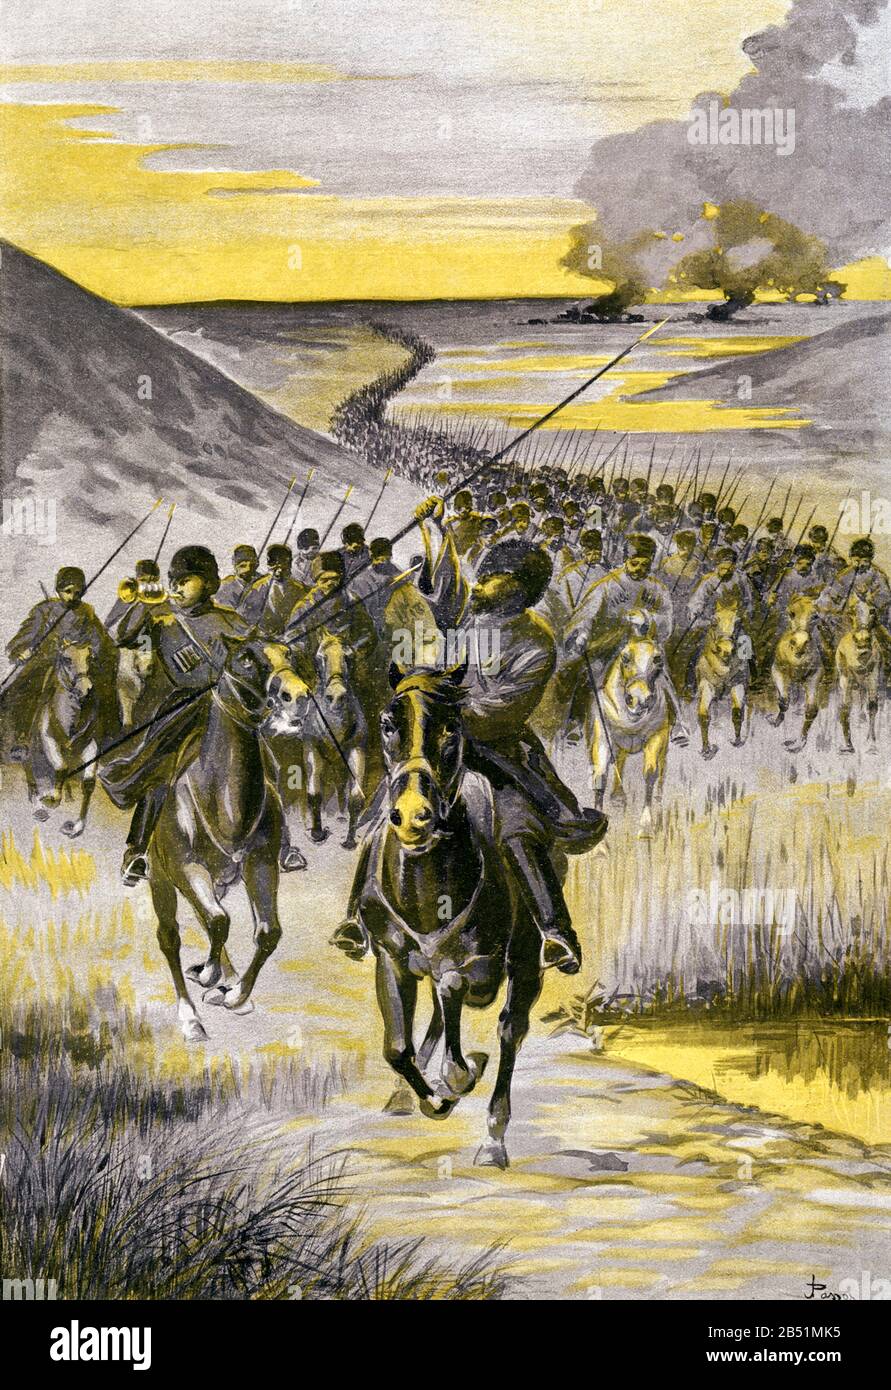 Horse-riding Cossacks invade East Prussia in the First World War. First World War illustrated by Augusto Riera Stock Photo